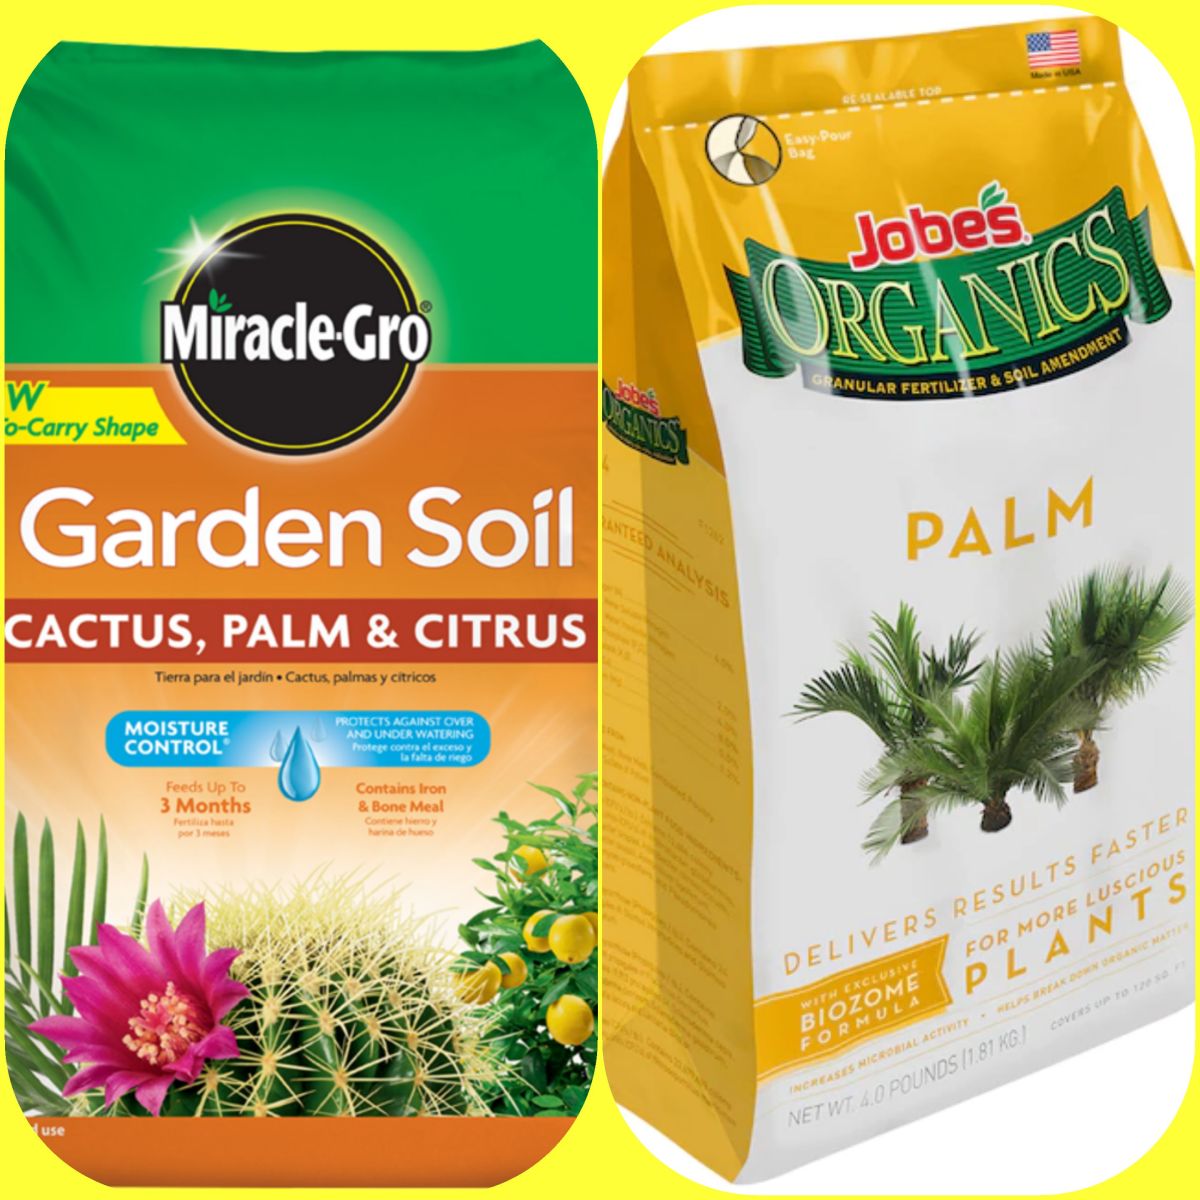 Choosing the proper potting soil is crucial to a healthy Majestic Palm.